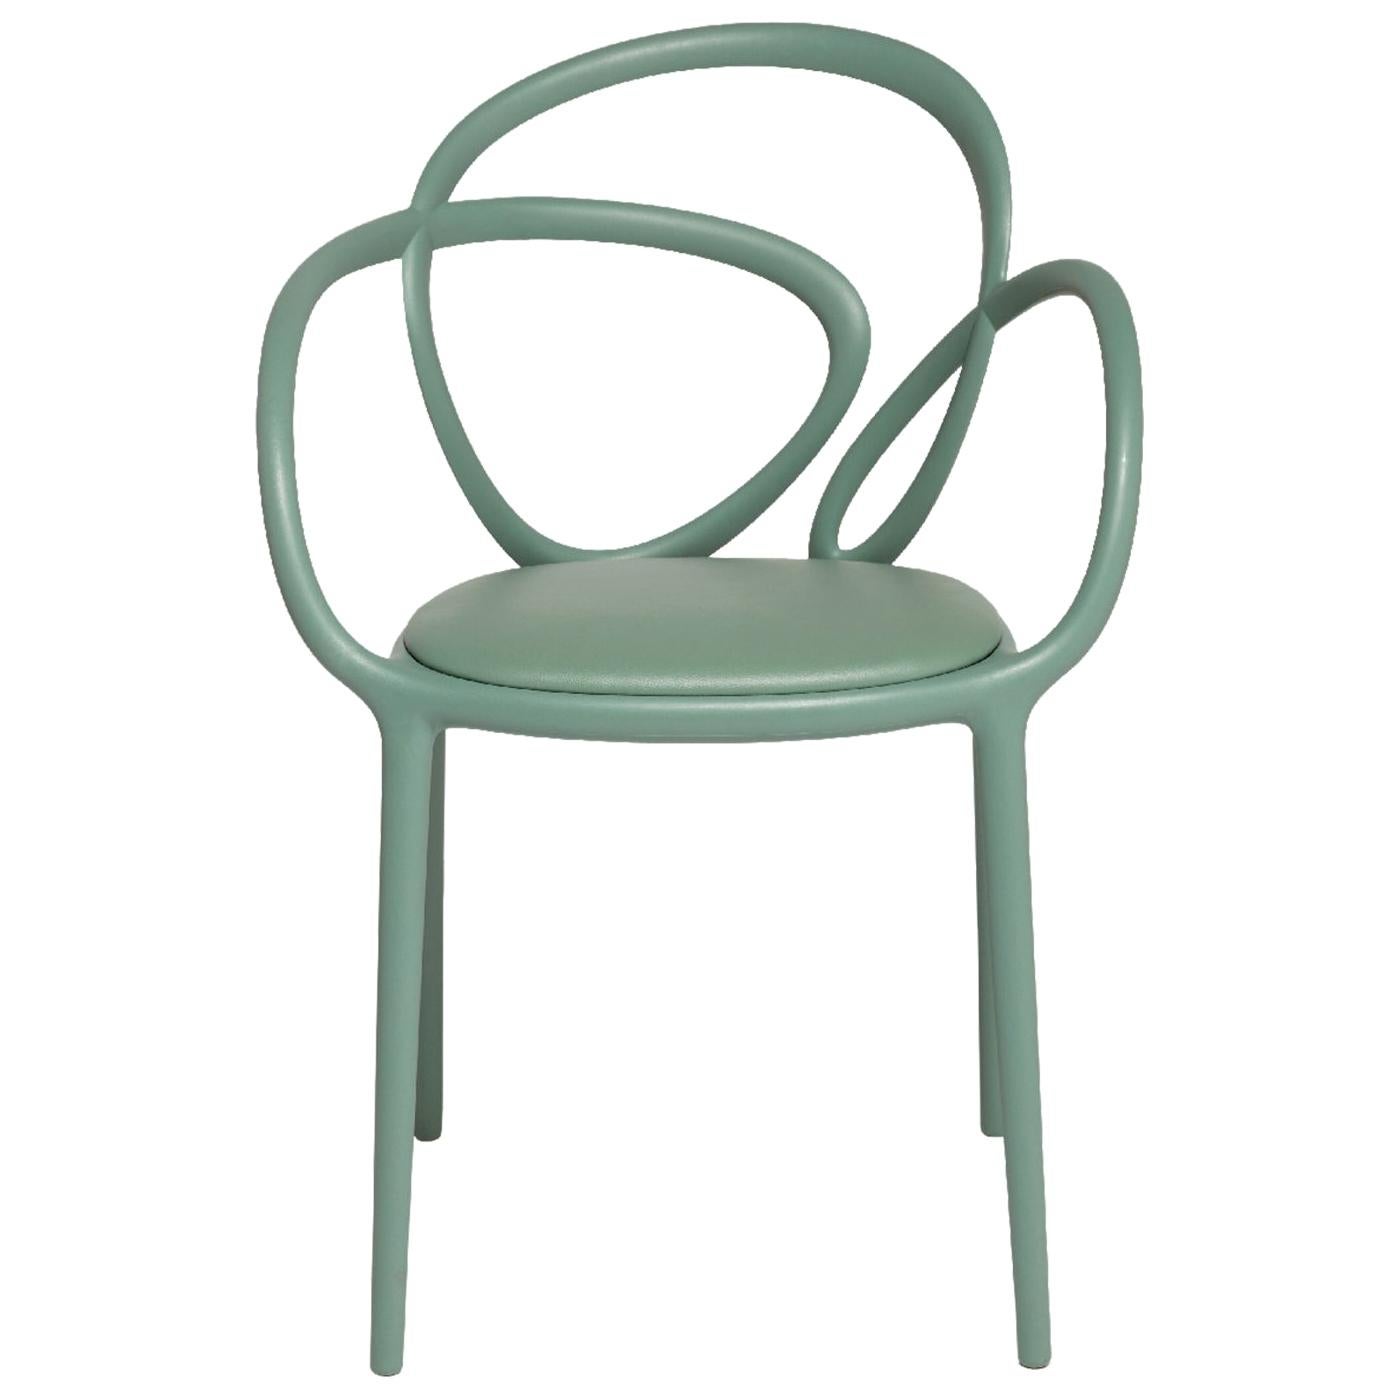 Sage Green Loop Padded Armchair, Made in Italy